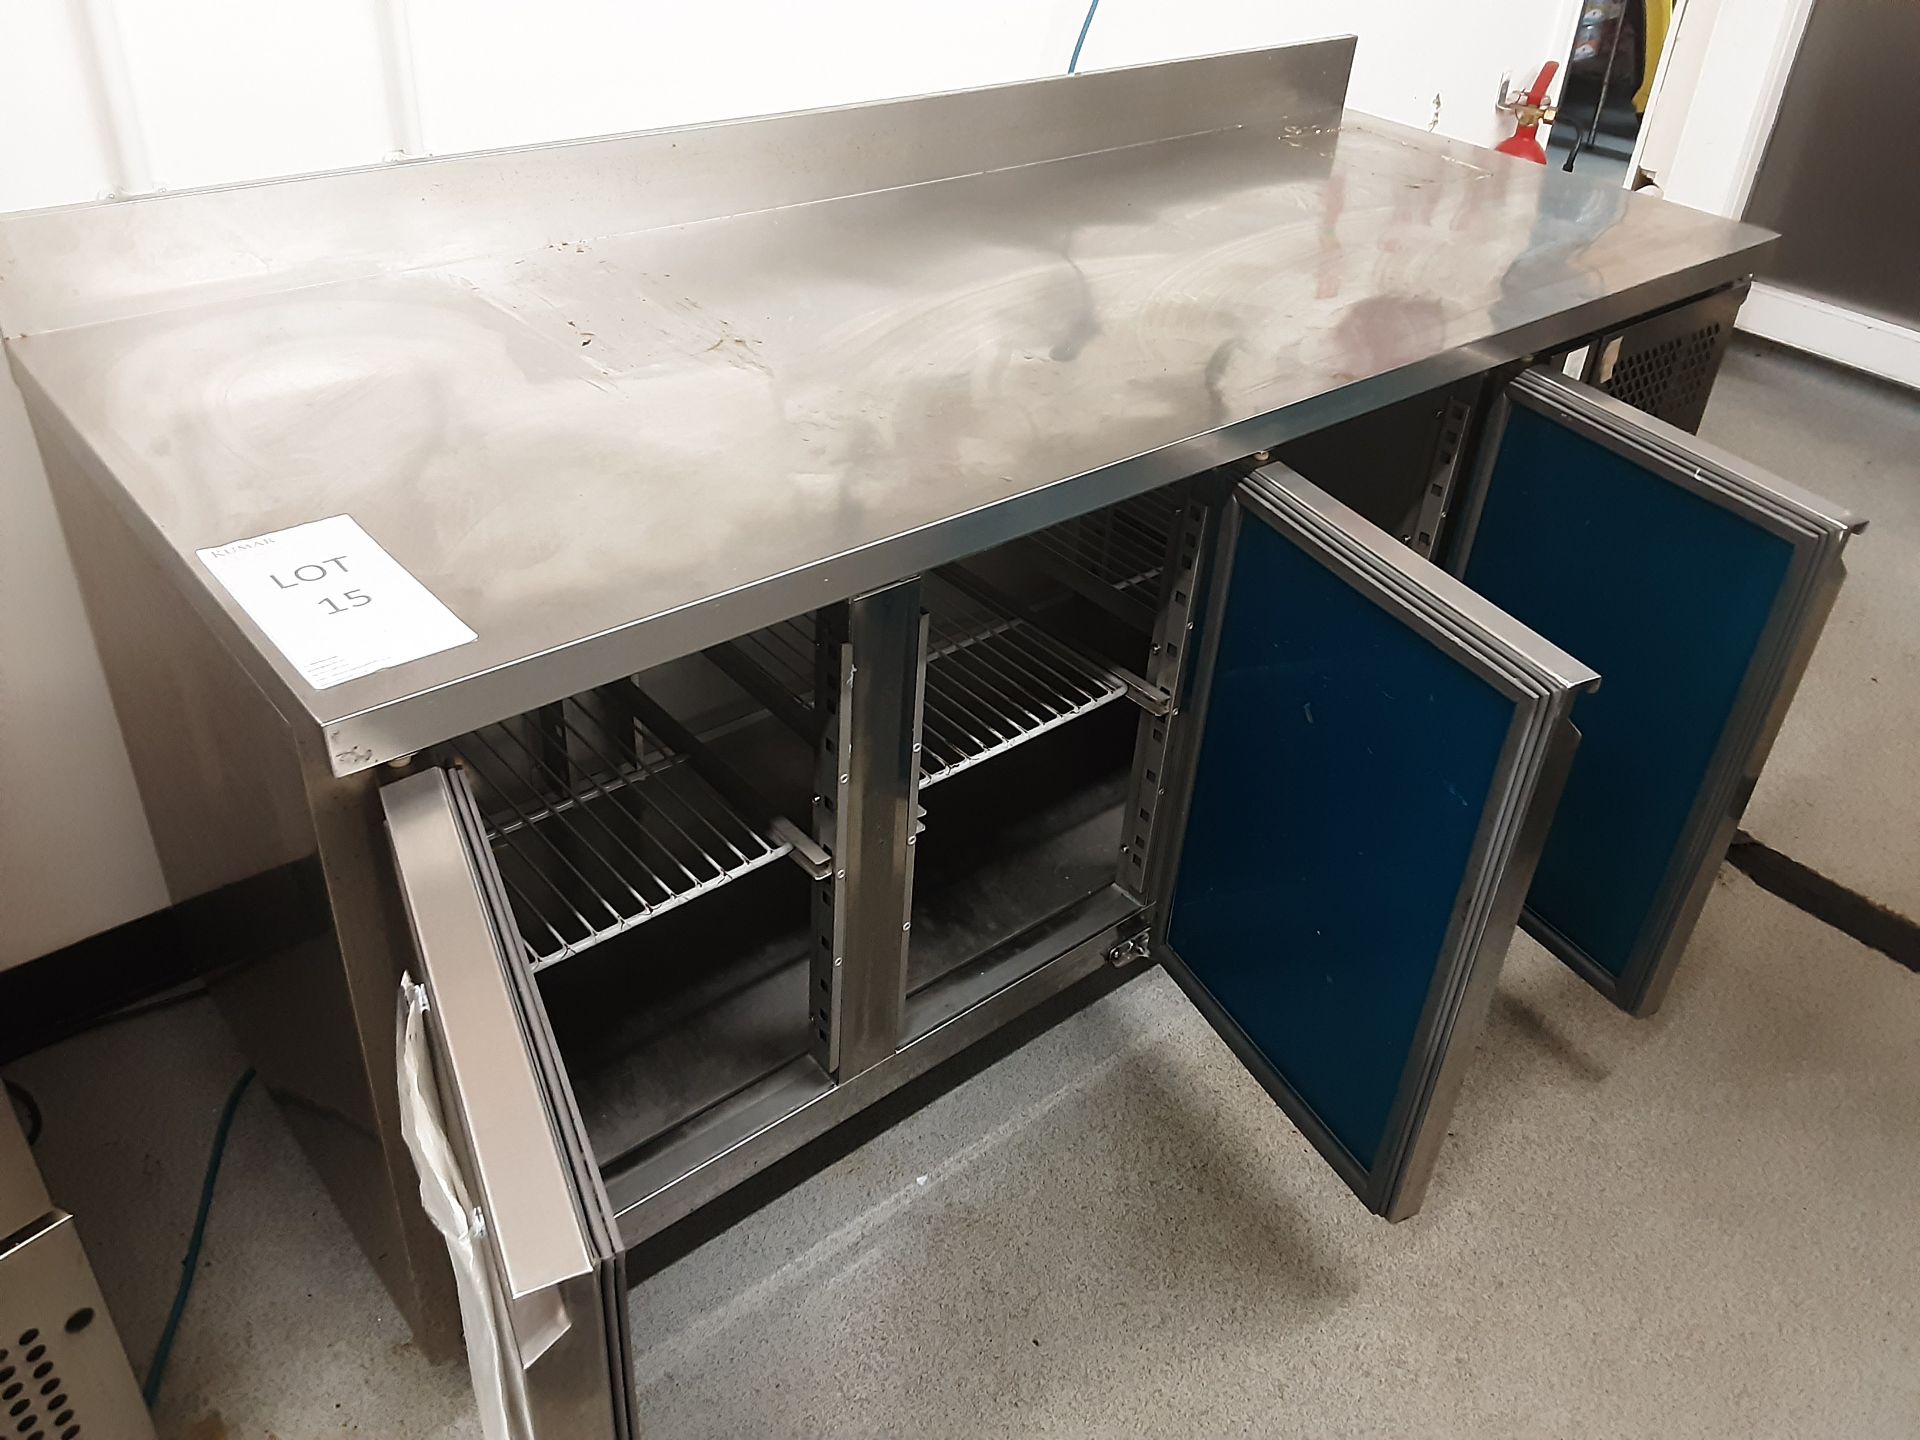 Blizzard HBC3 417 Ltr 3 Door Refrigerated Prep Counter With Upstand Serial Number 1603018GN32TO28 - Image 3 of 5